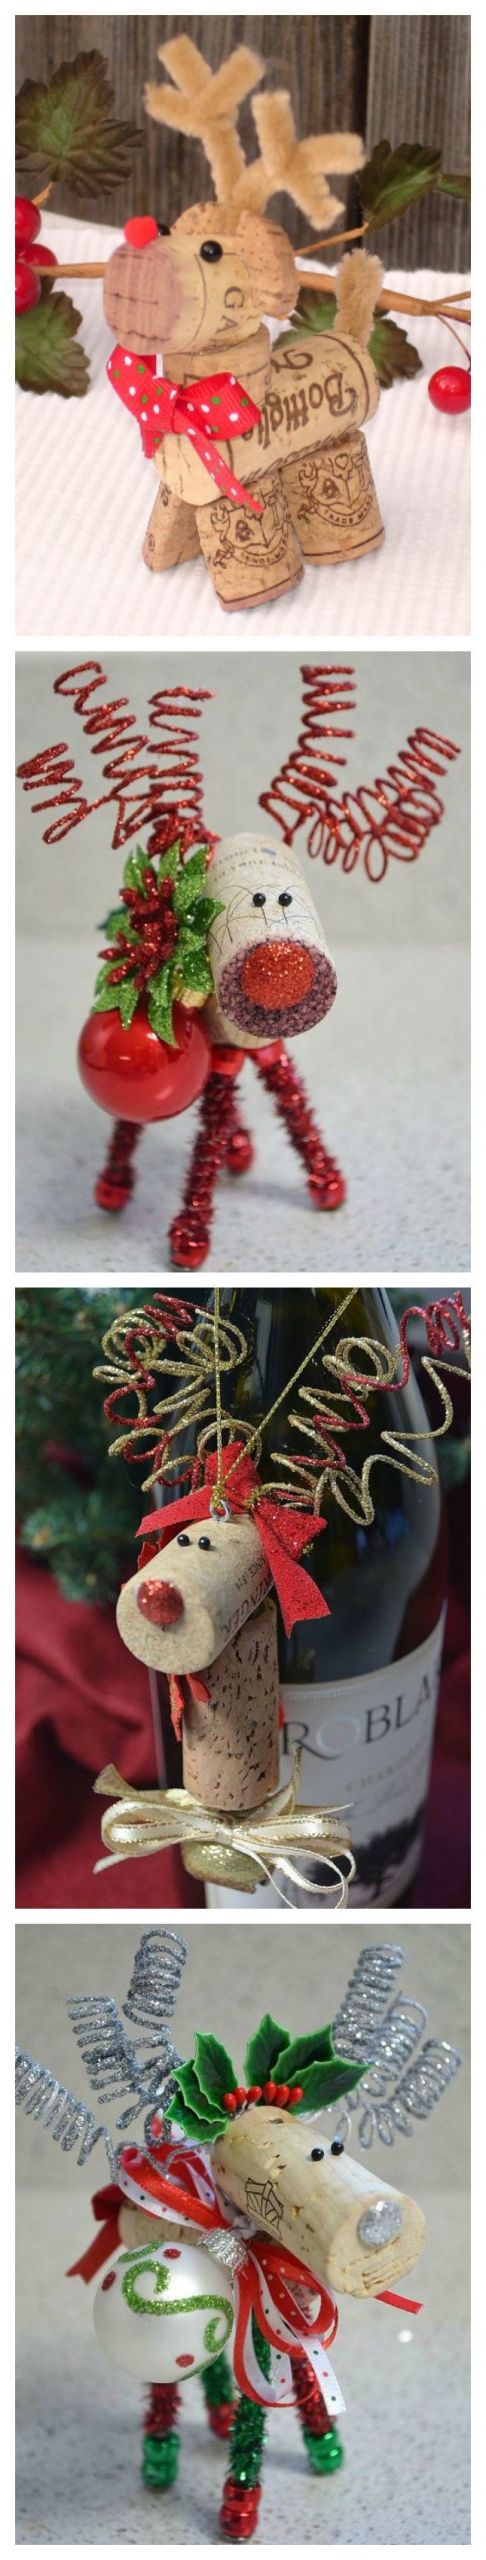 Pinterest DIY Christmas Crafts
 17 Epic Christmas Craft Ideas Pretty My Party